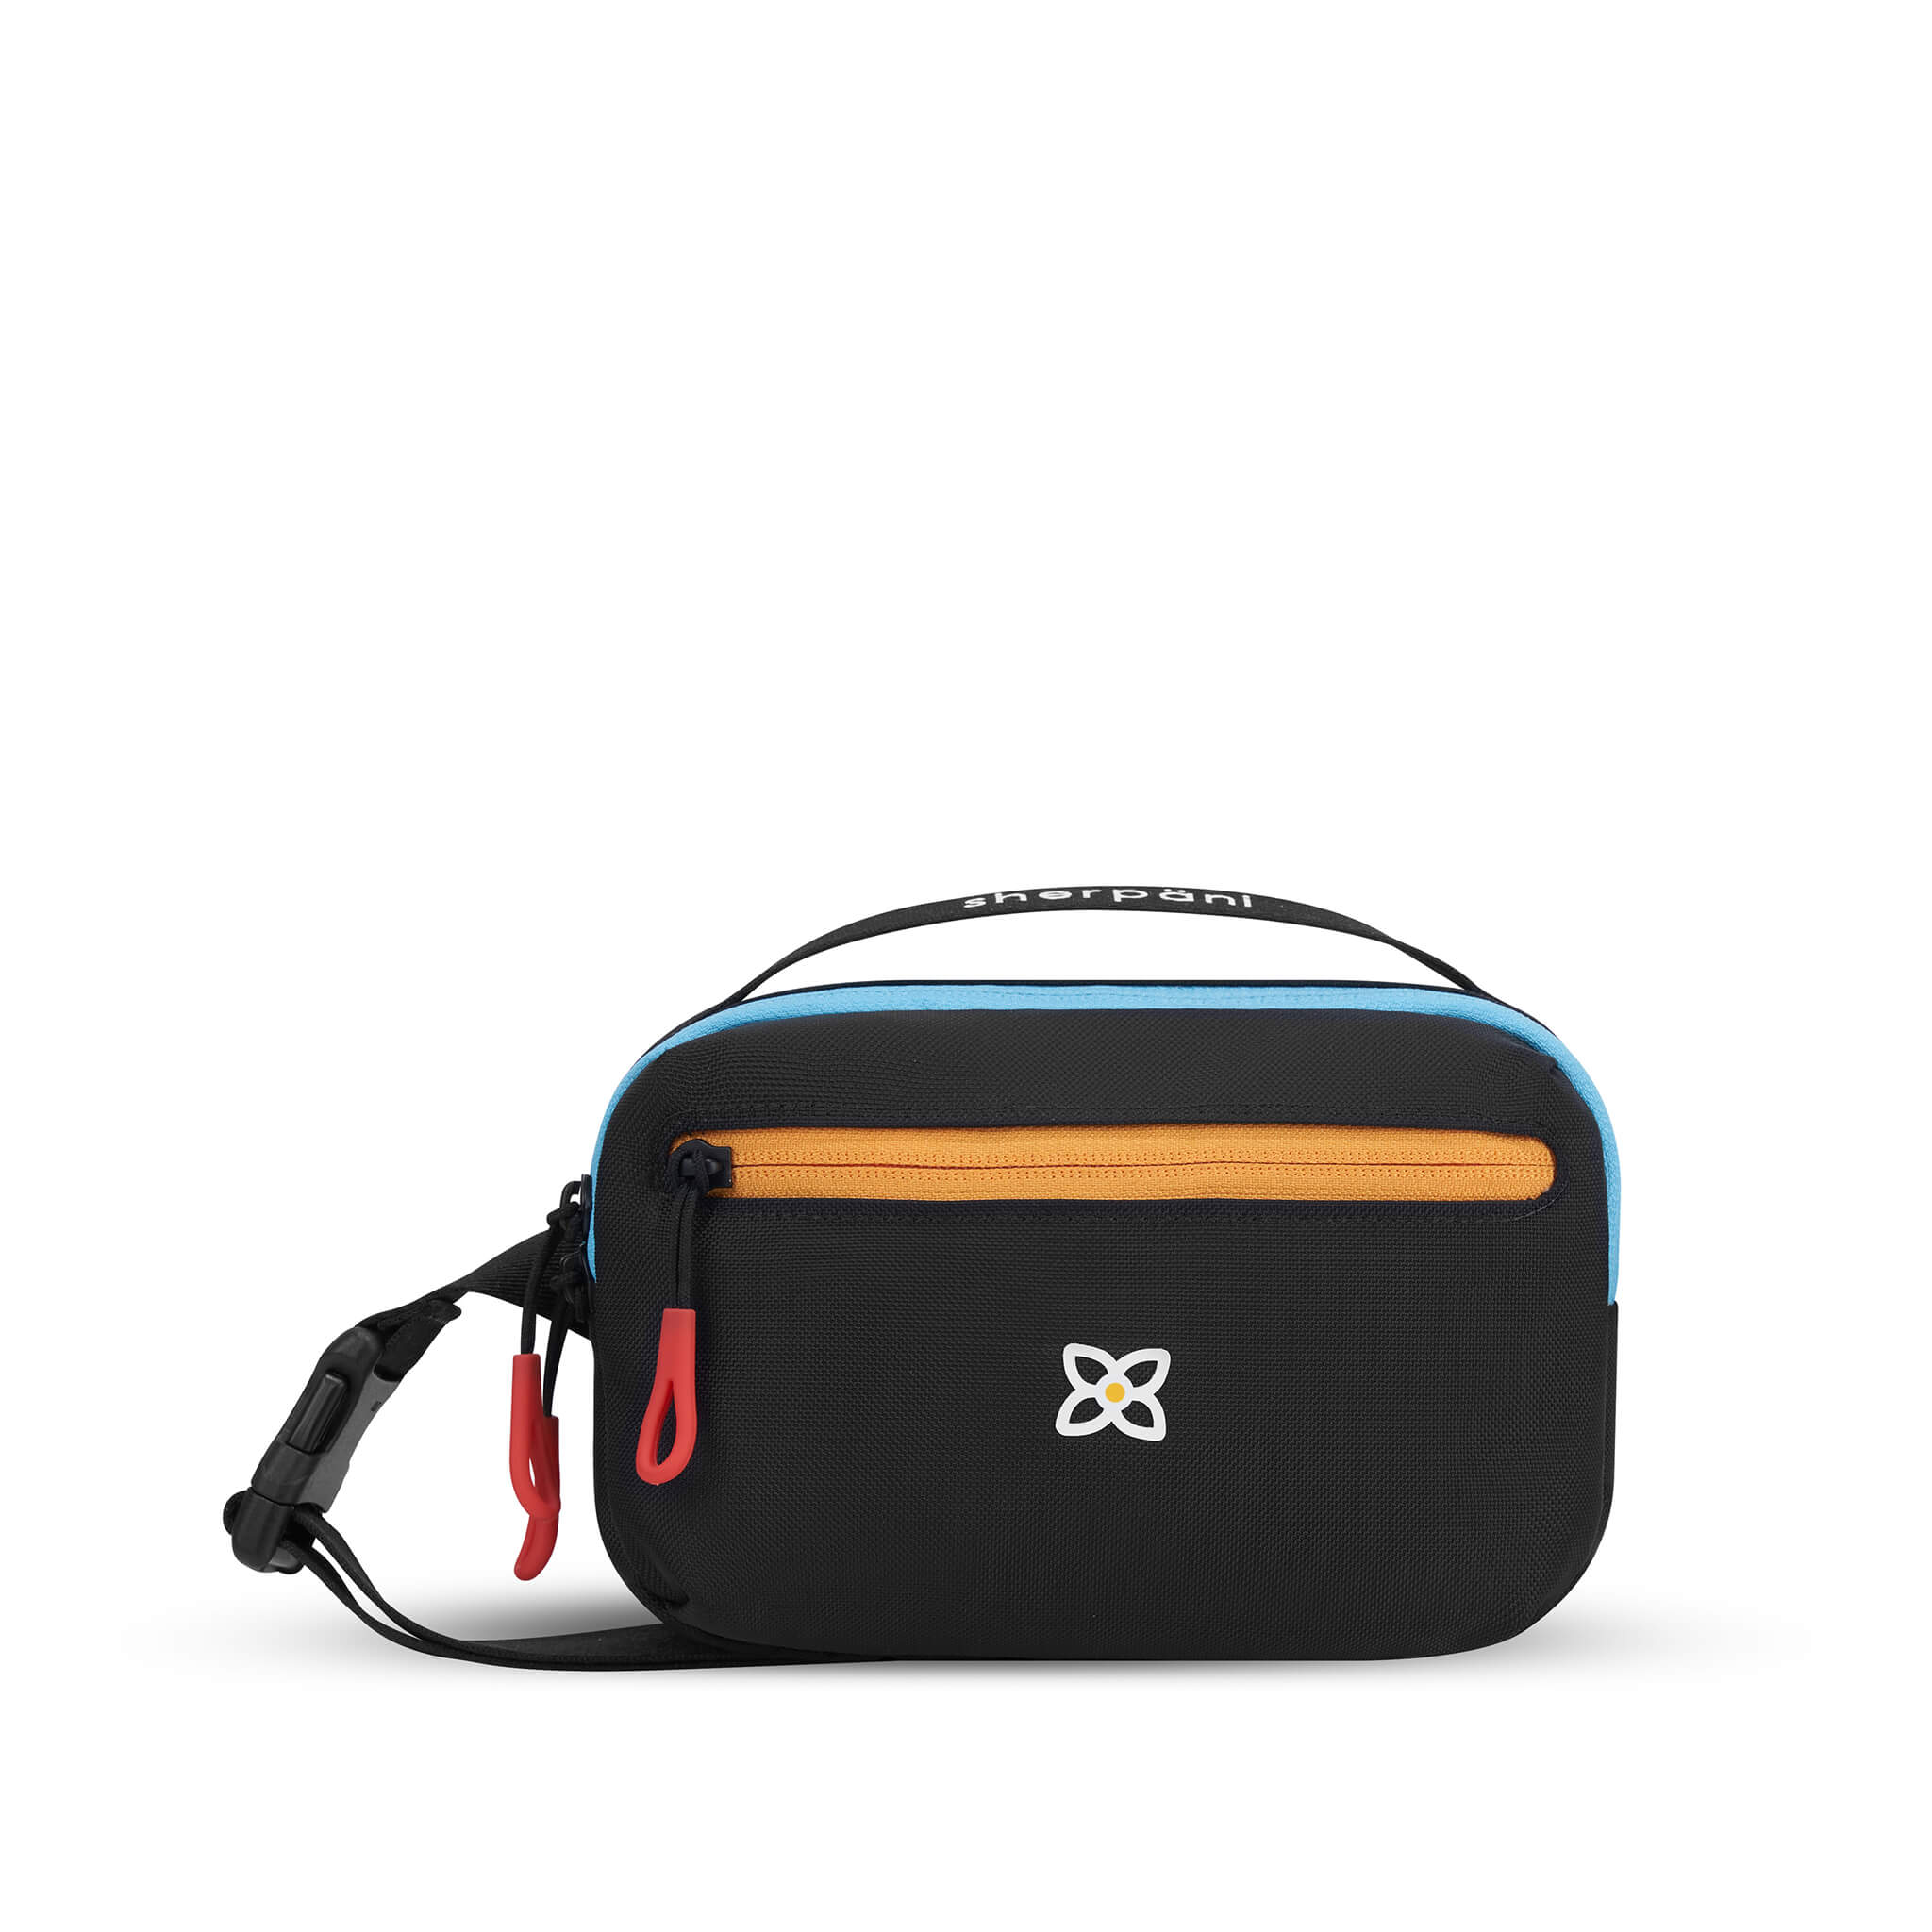 Flat front view of Sherpani’s fanny pack, the Hyk in Chromatic. The bag is black with yellow and blue accents. There is an external zipper pocket on the front of the bag. Easy-pull zippers are accented in red. The fanny pack features an adjustable strap with a buckle. 